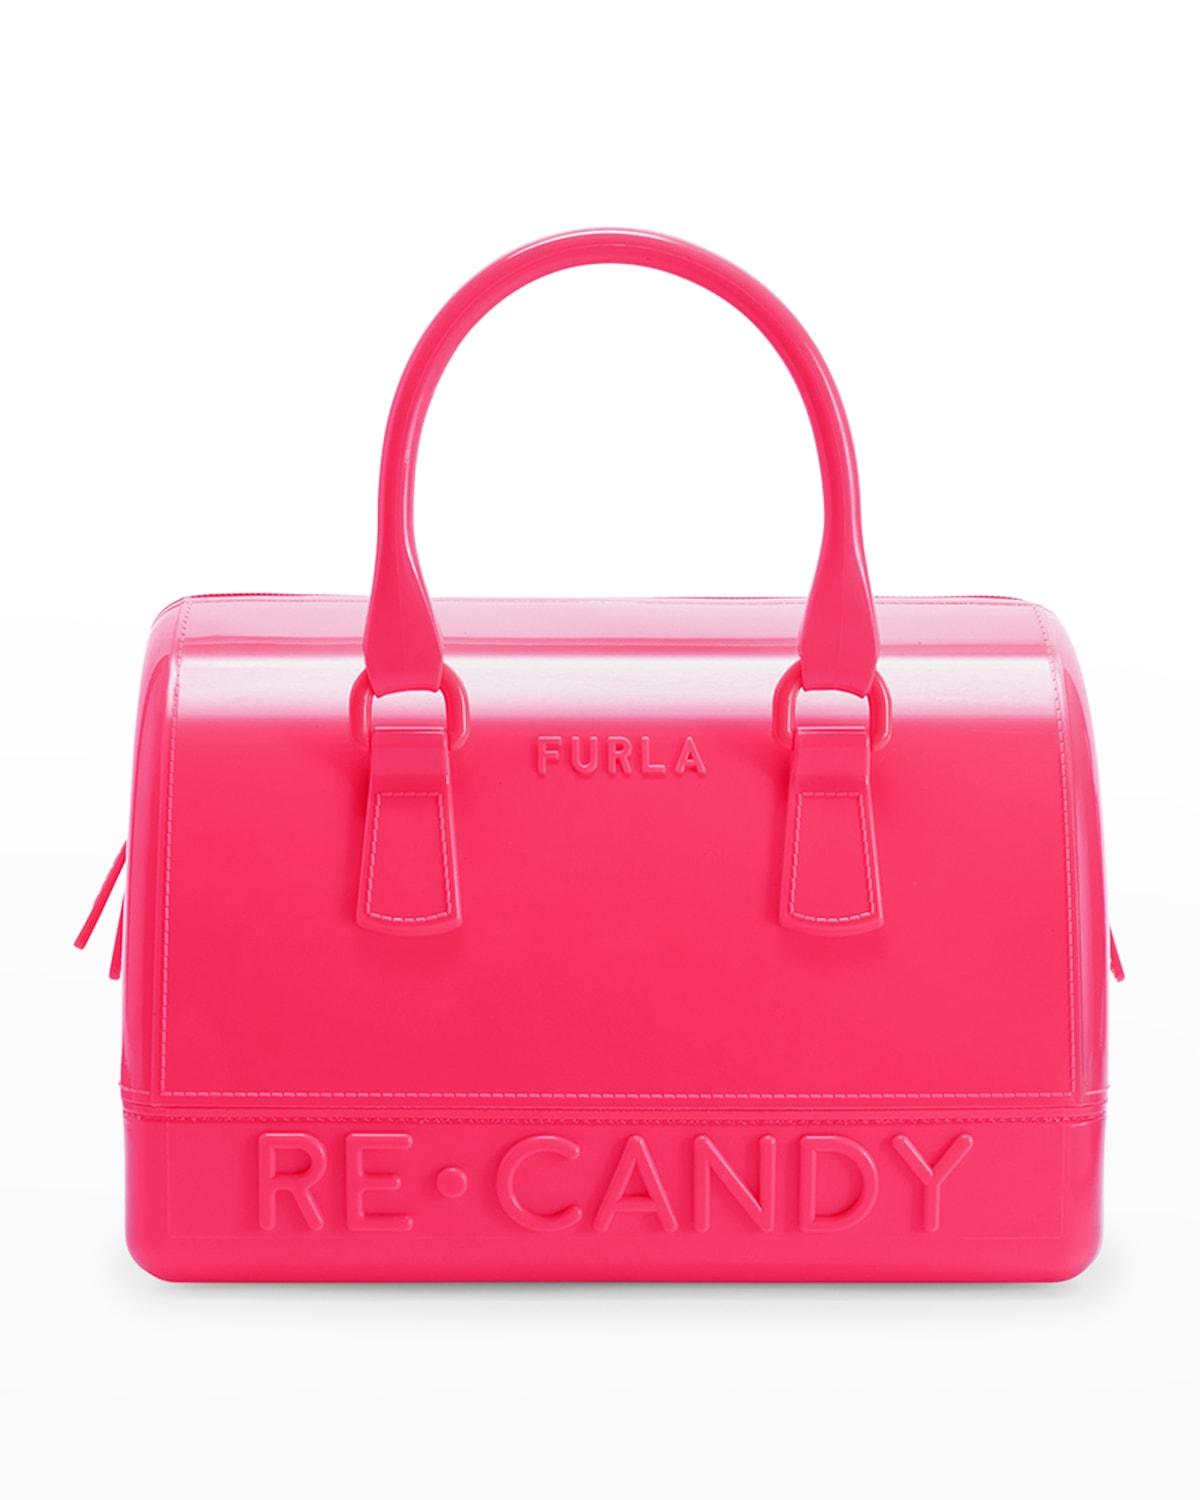 Furla Re-candy Boston Top-handle Bag in Pink | Lyst